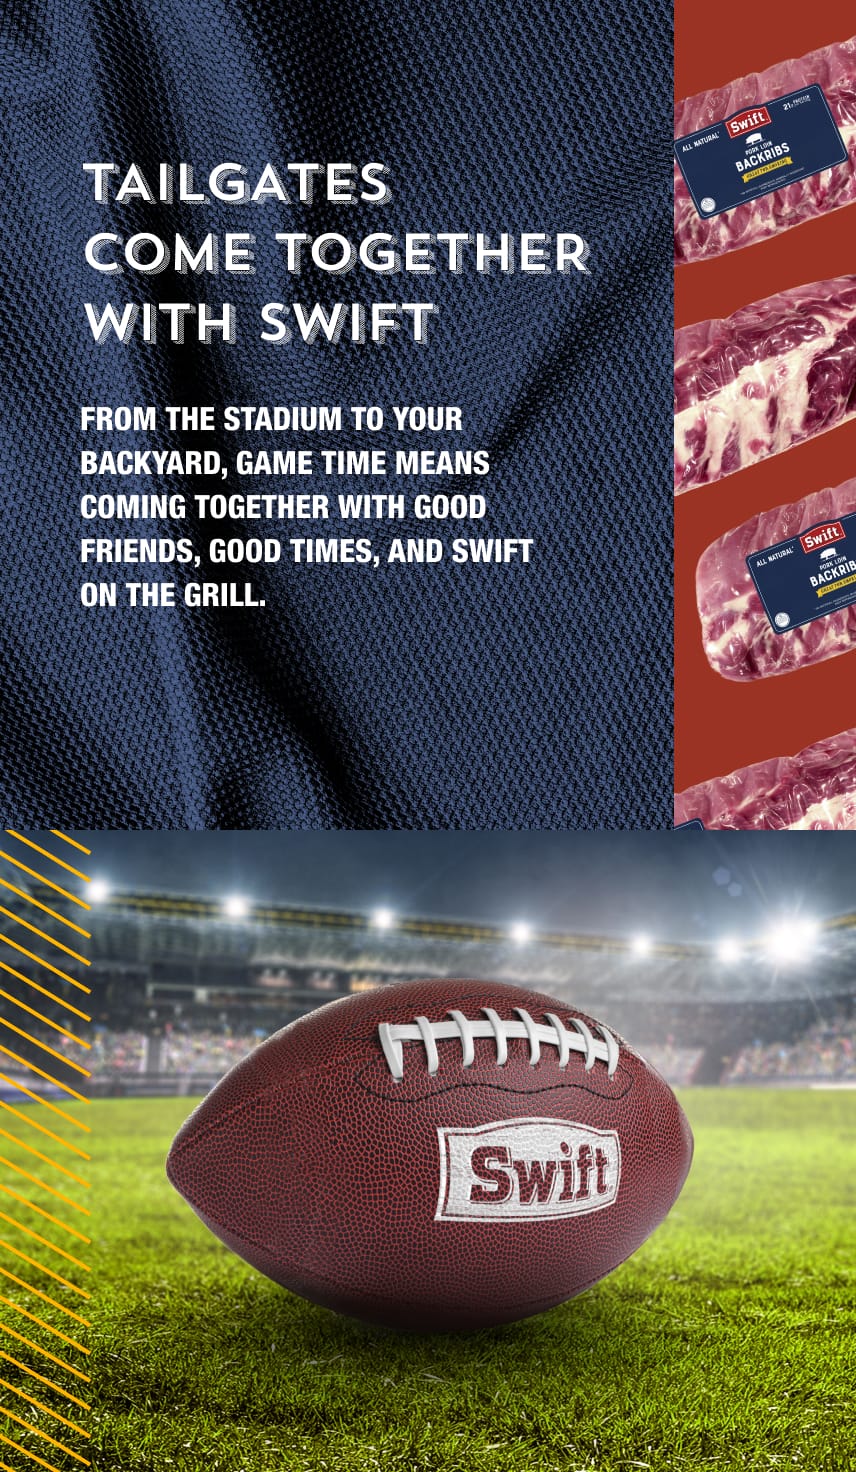 Tailgates Come Together With Swift. From the stadium to your backyard, game time means coming together with good friends, good times, and Swift on the grill.